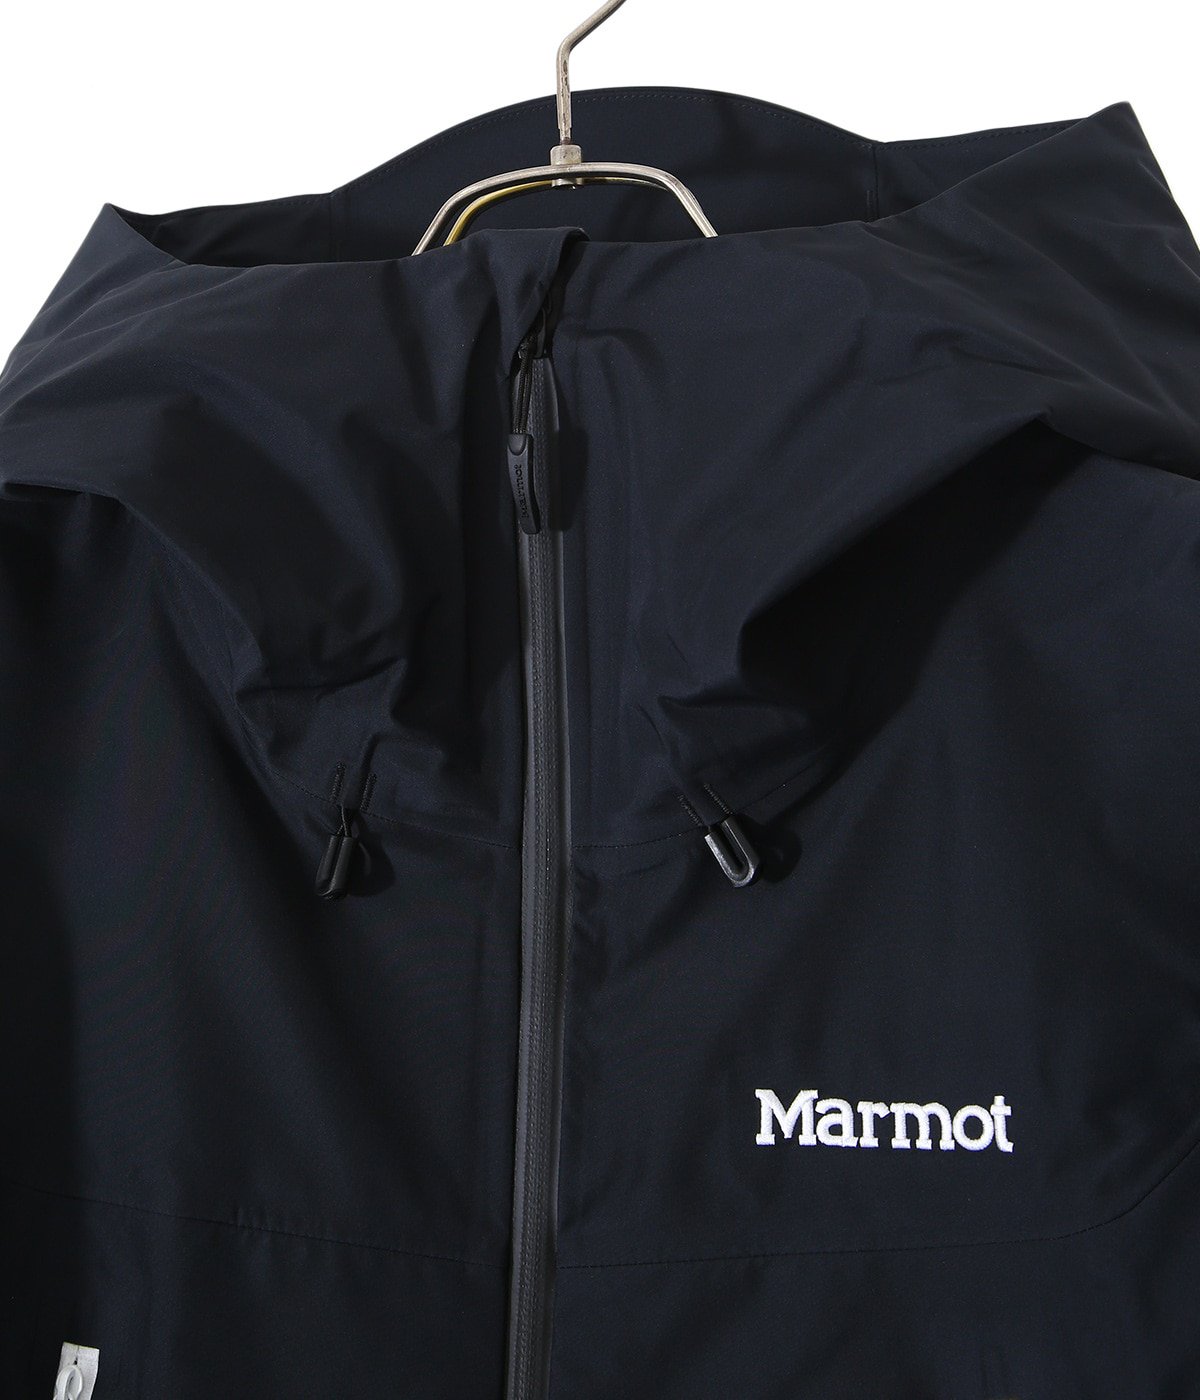 ONLY ARK】別注 GORE-TEX 3L A Jacket | Marmot(マーモット 